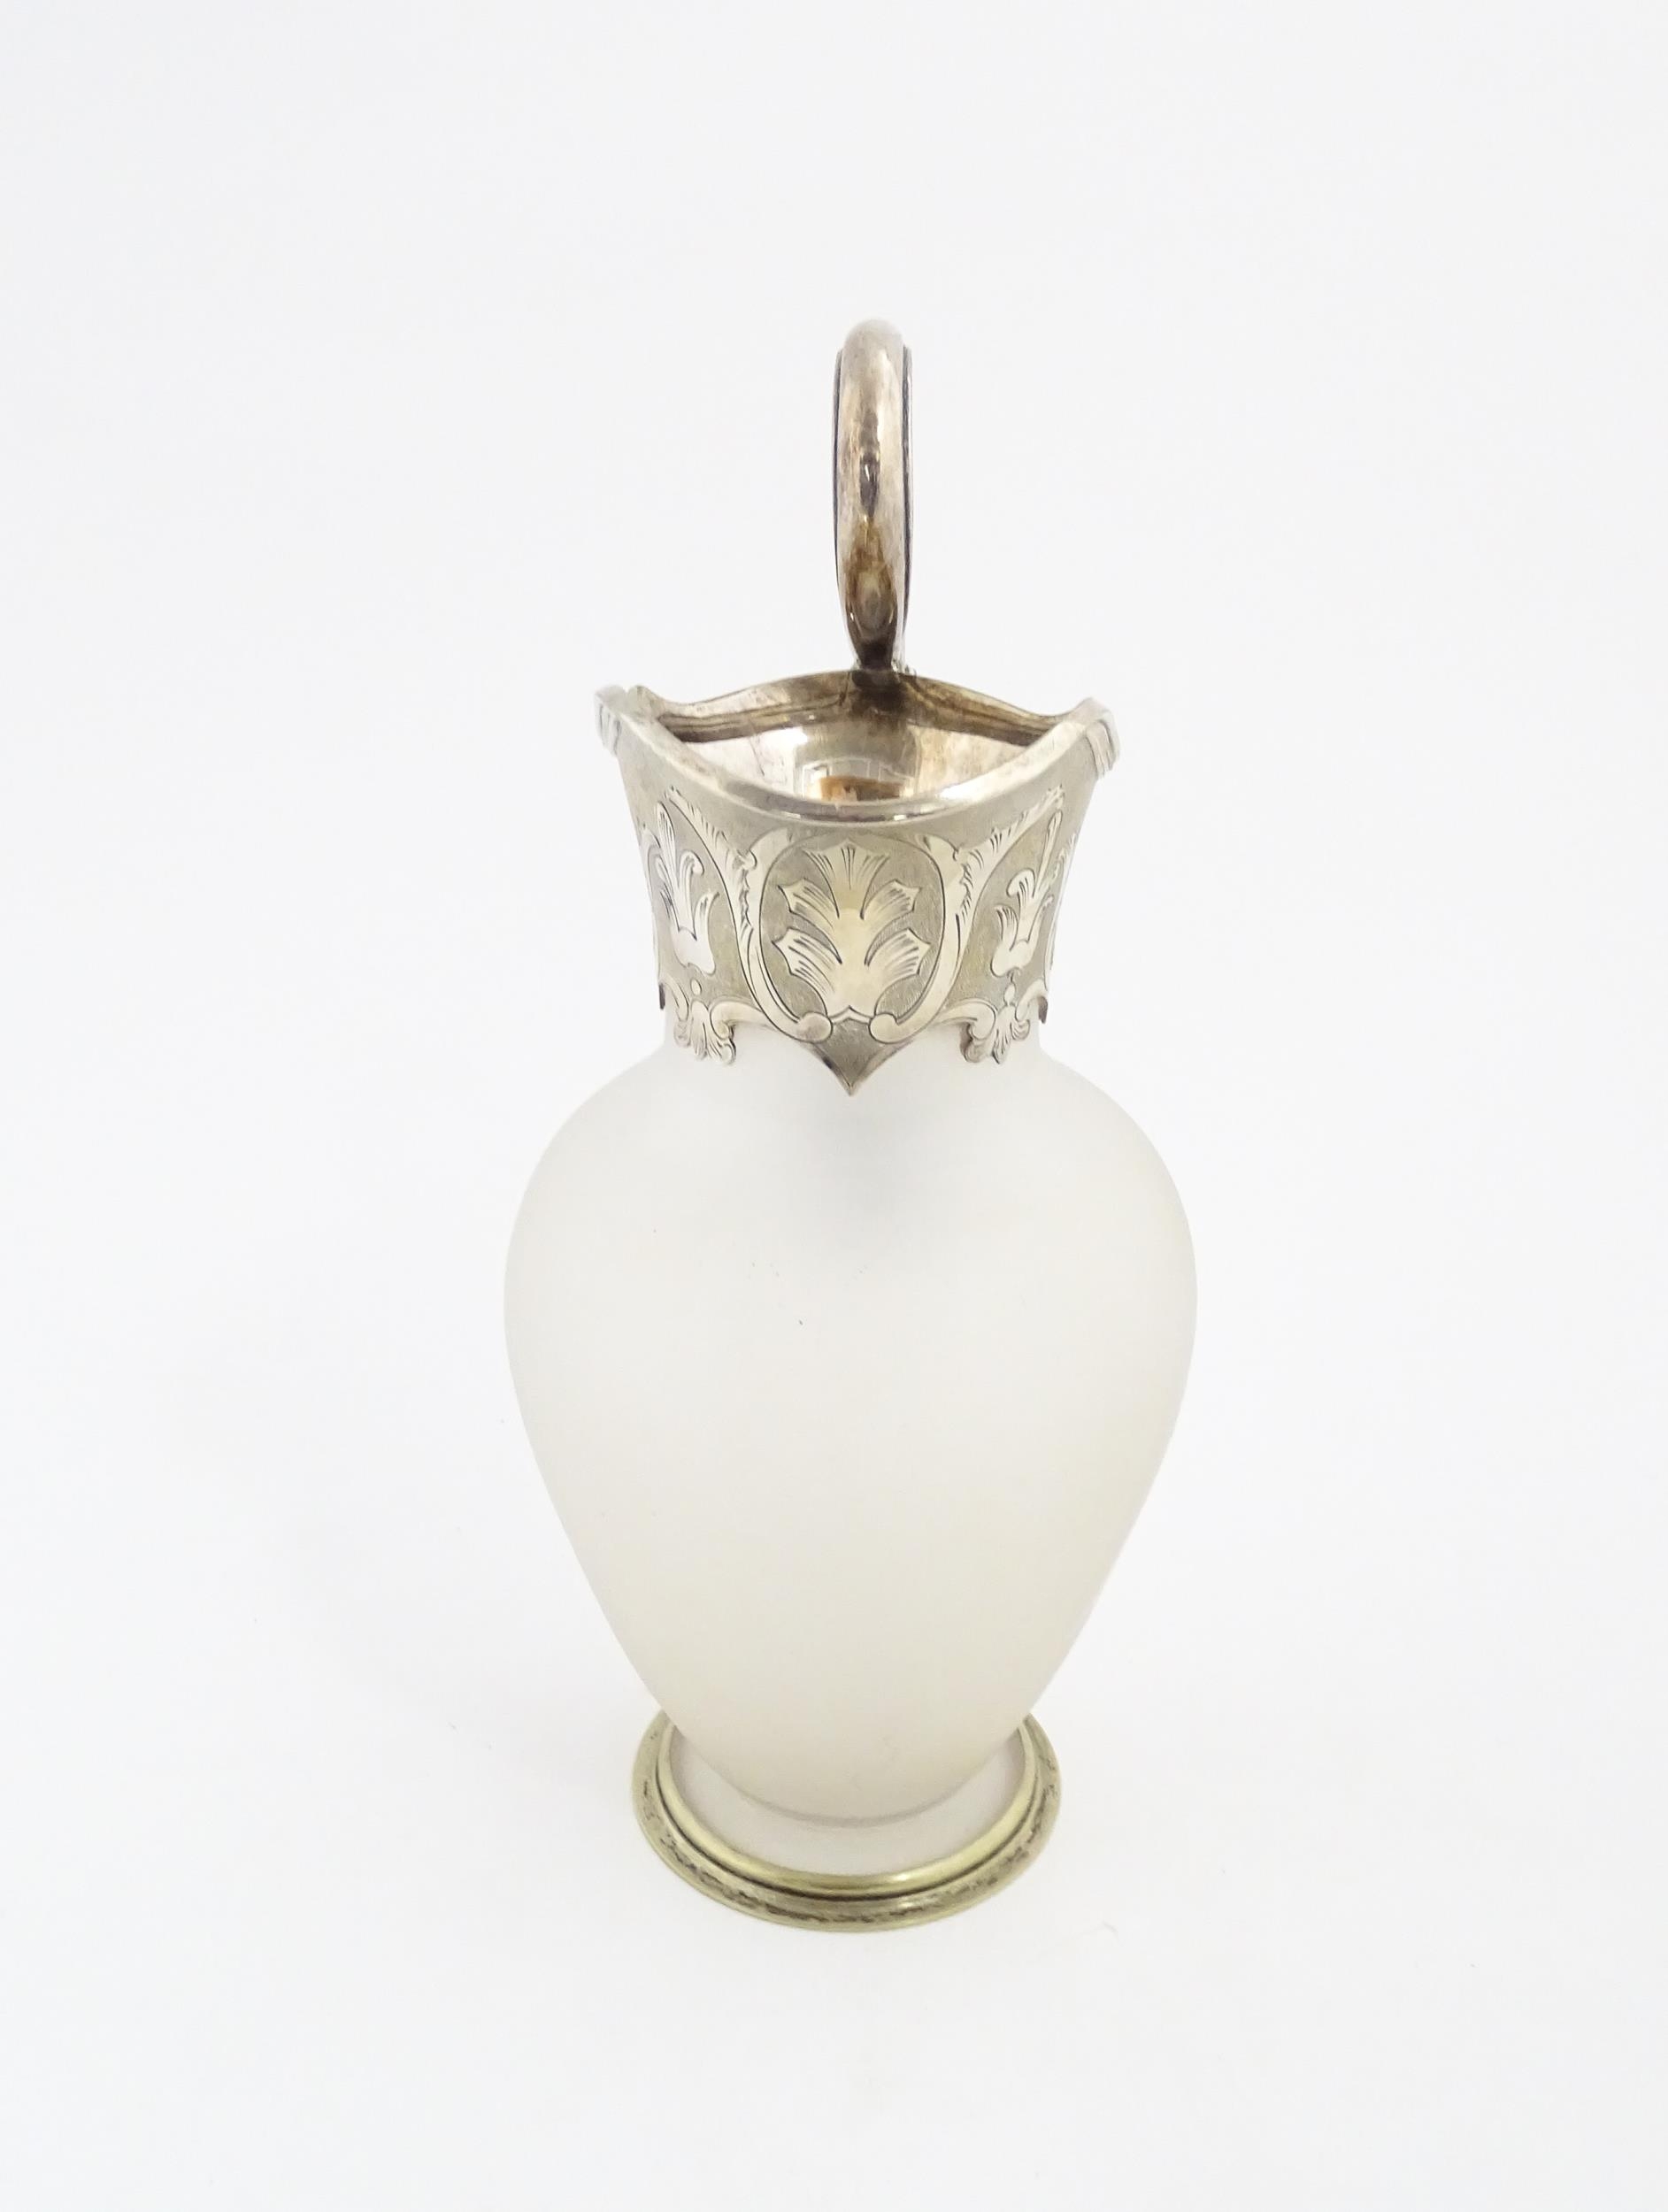 A Victorian frosted glass jug of ewer form with silver plate handle and mounts. Approx. 11 1/2" high - Image 3 of 6